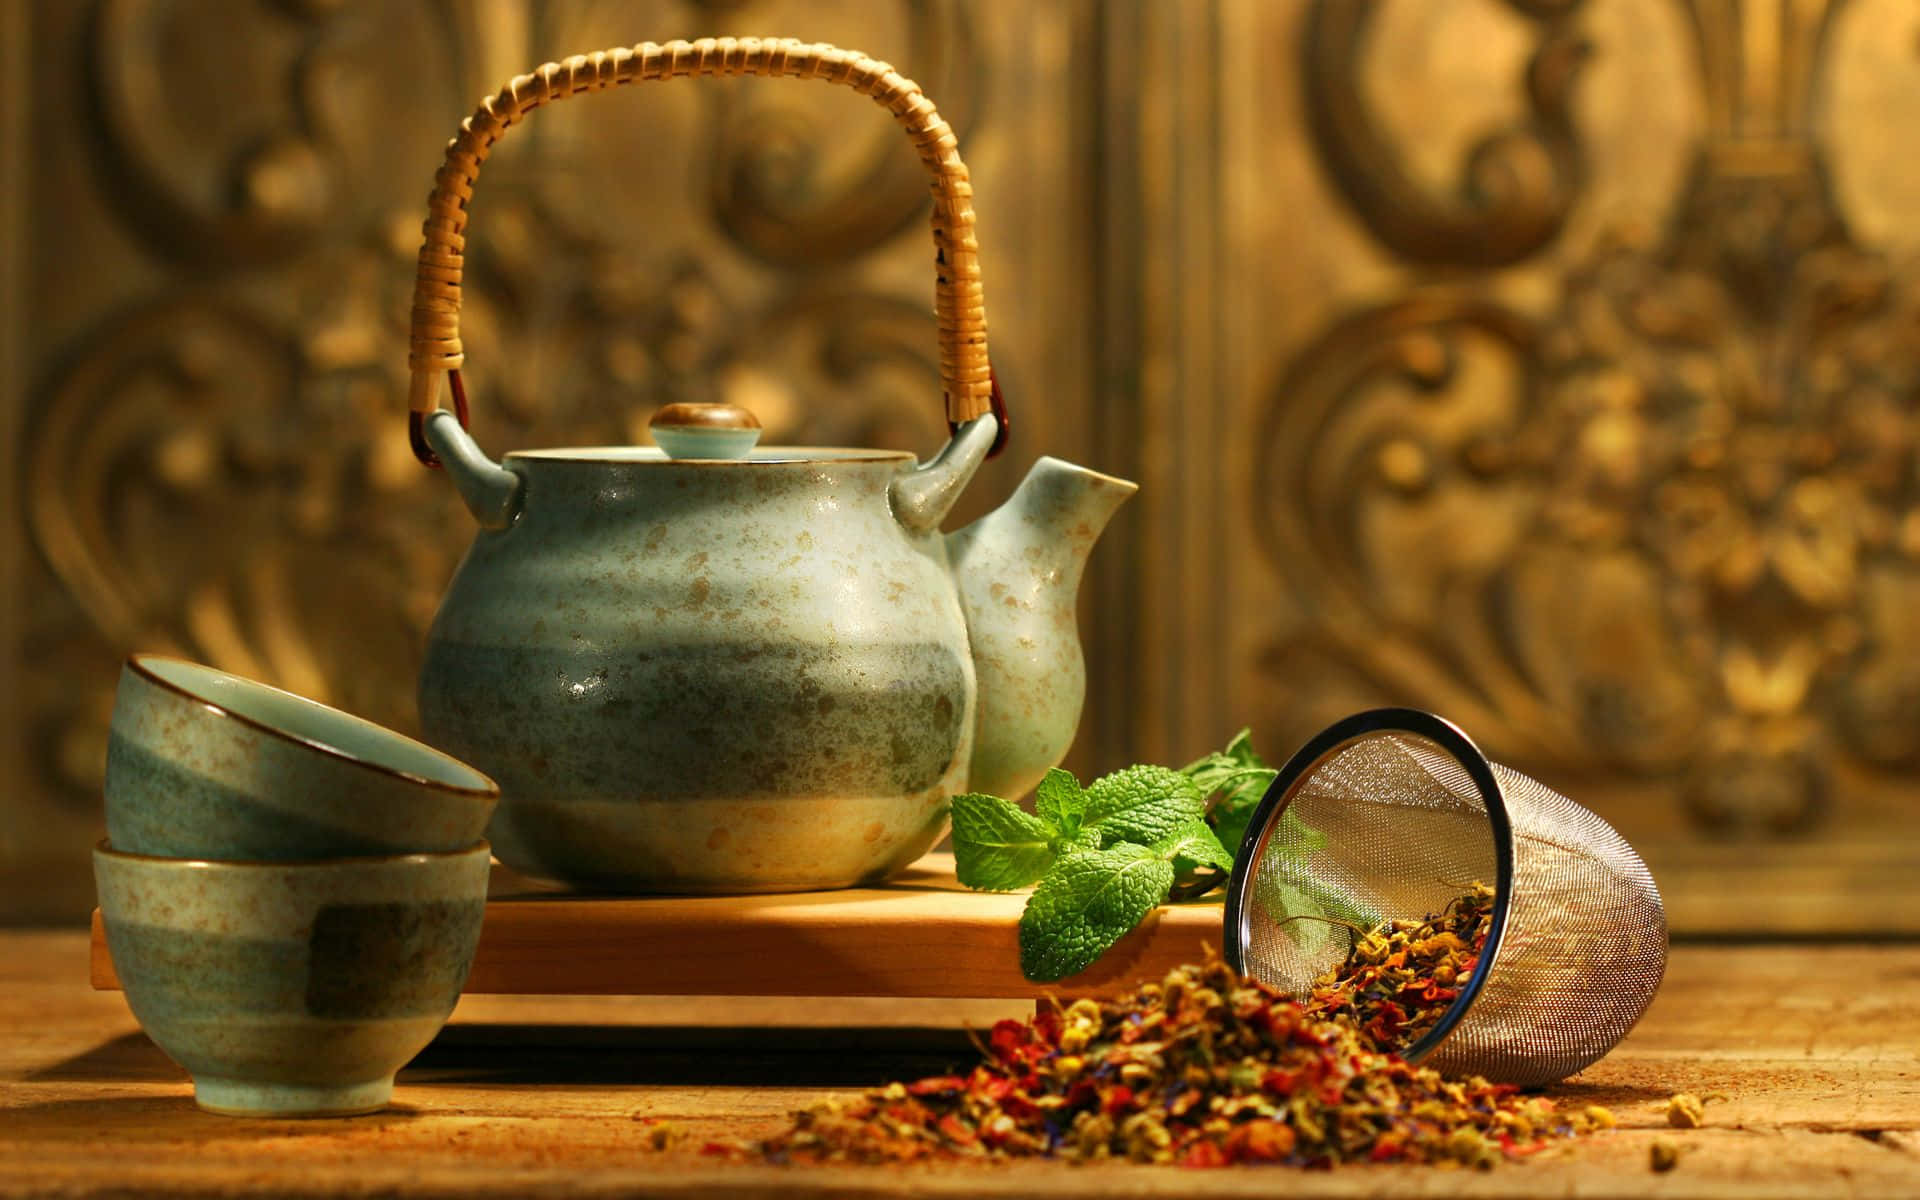 Description- Tea is the perfect beverage to enjoy the beauty of the morning or to relax after a long day.